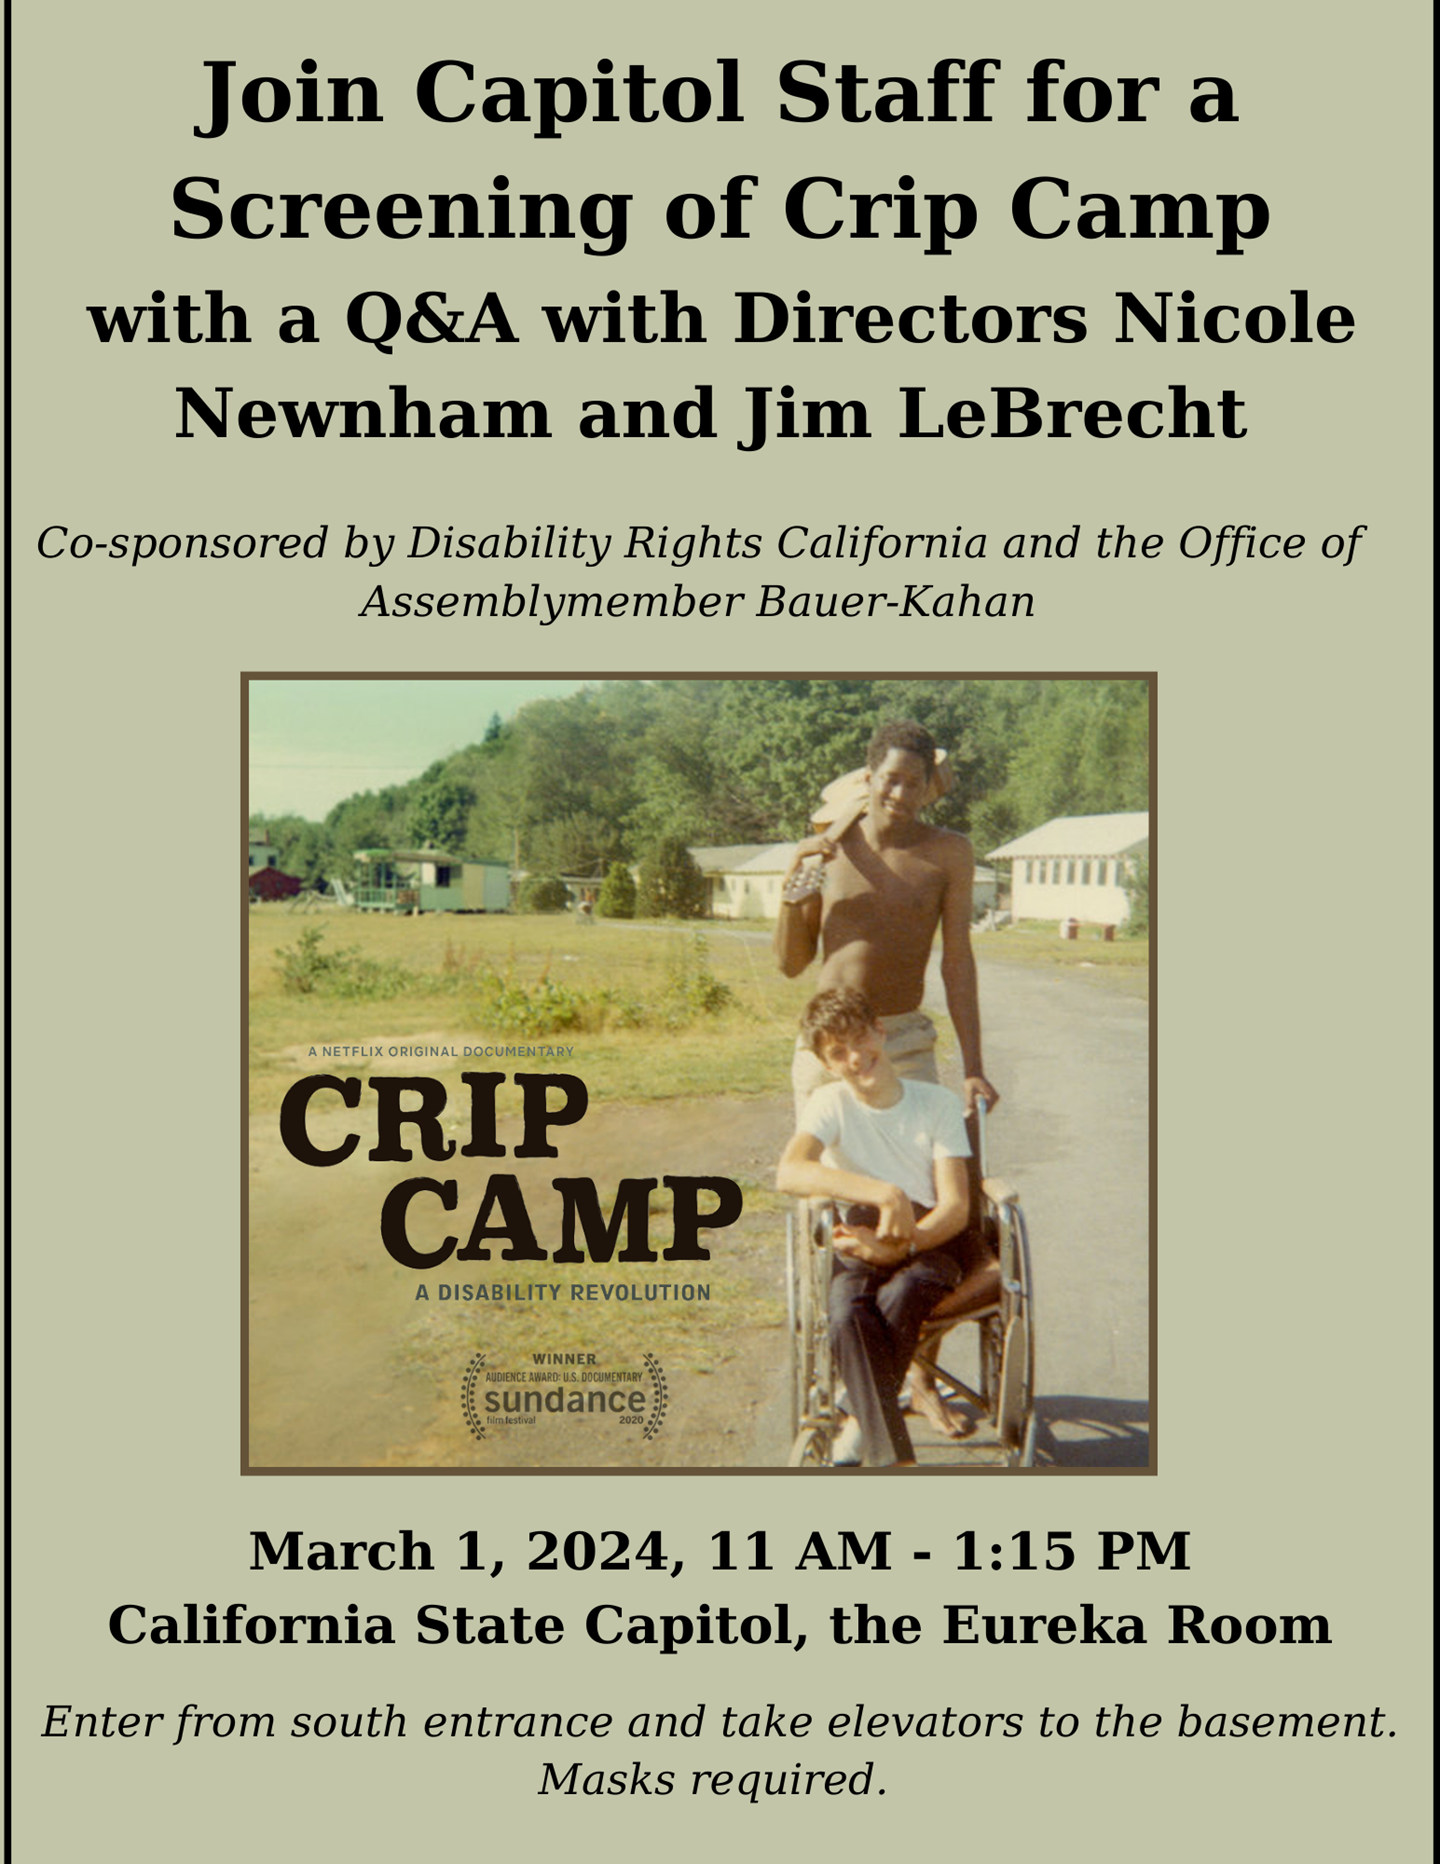 A flyer promoting the screening of Crip Camp at the California State Capitol Building in the Eureka Room